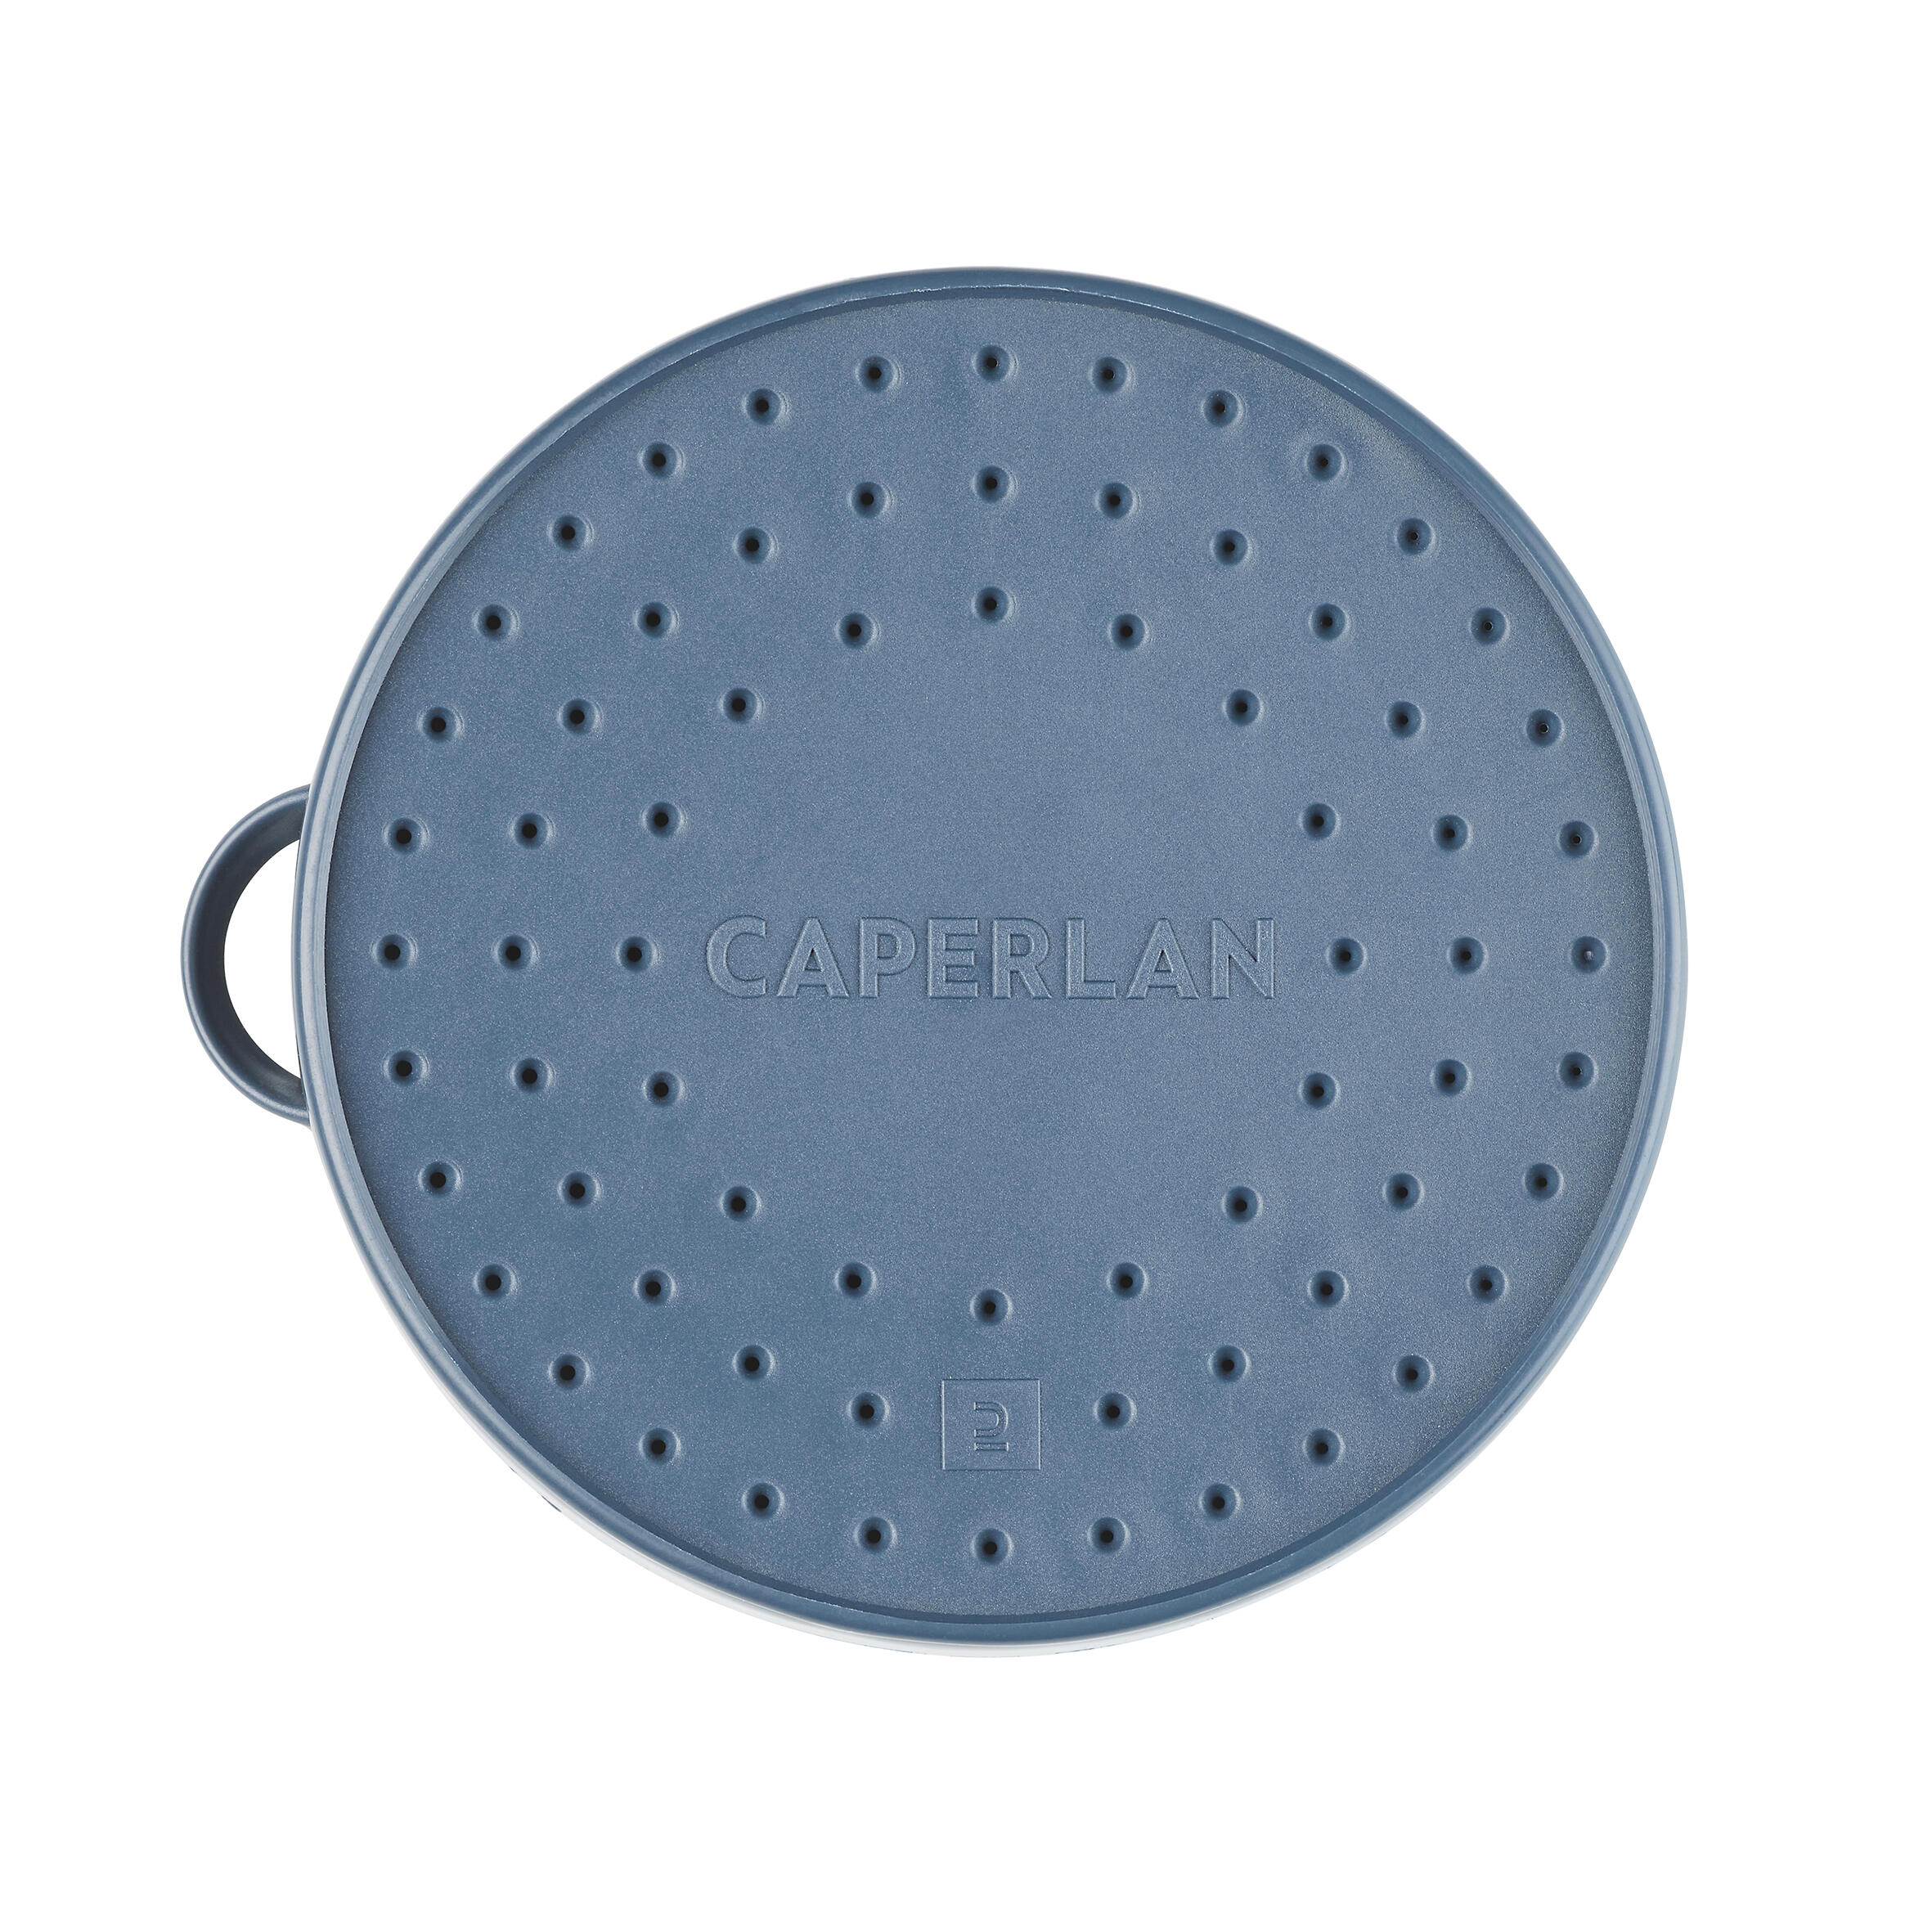 ROUND BAIT BOX 80MM DIAMETER WITH A LID WITH HOLES LVB 0.2L 3/4